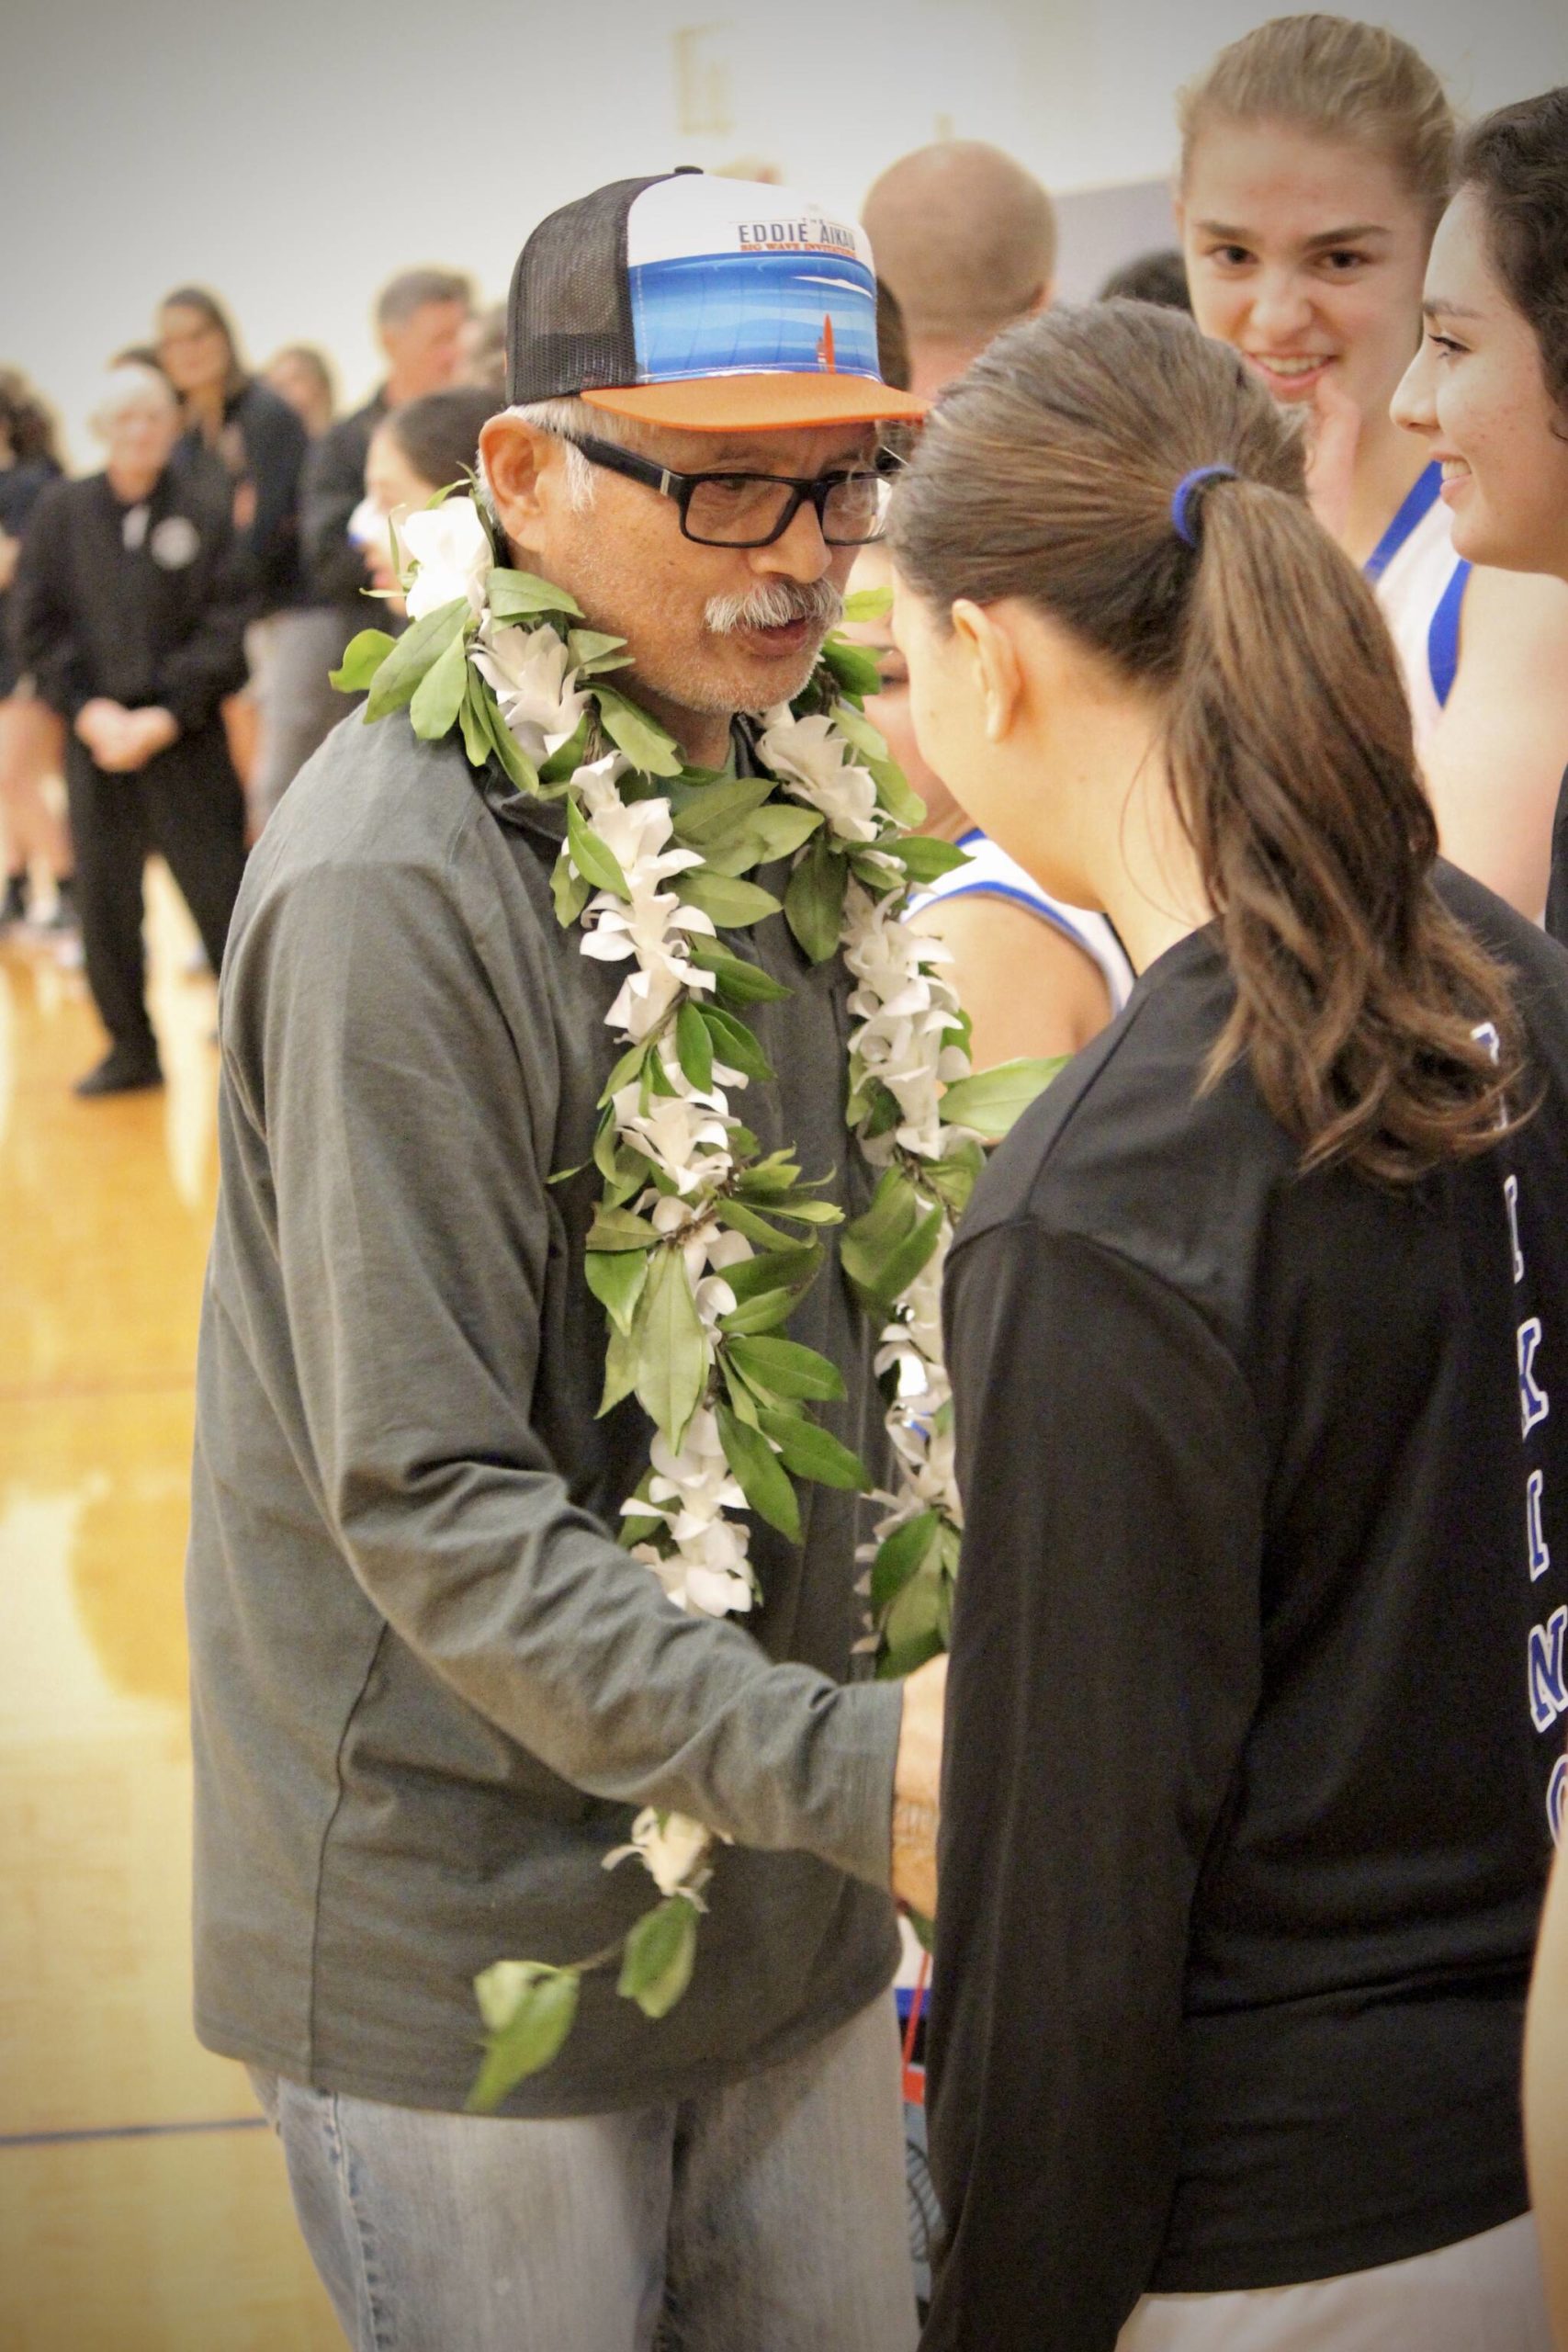 Corey Wiscomb photo.
On Dec. 15, after receiving the gift of a lei and a standing ovation for his decades of coaching, Coach Sasan made sure to find his way to a current senior, Shaye Spinner, to wish her luck on the evening’s game.